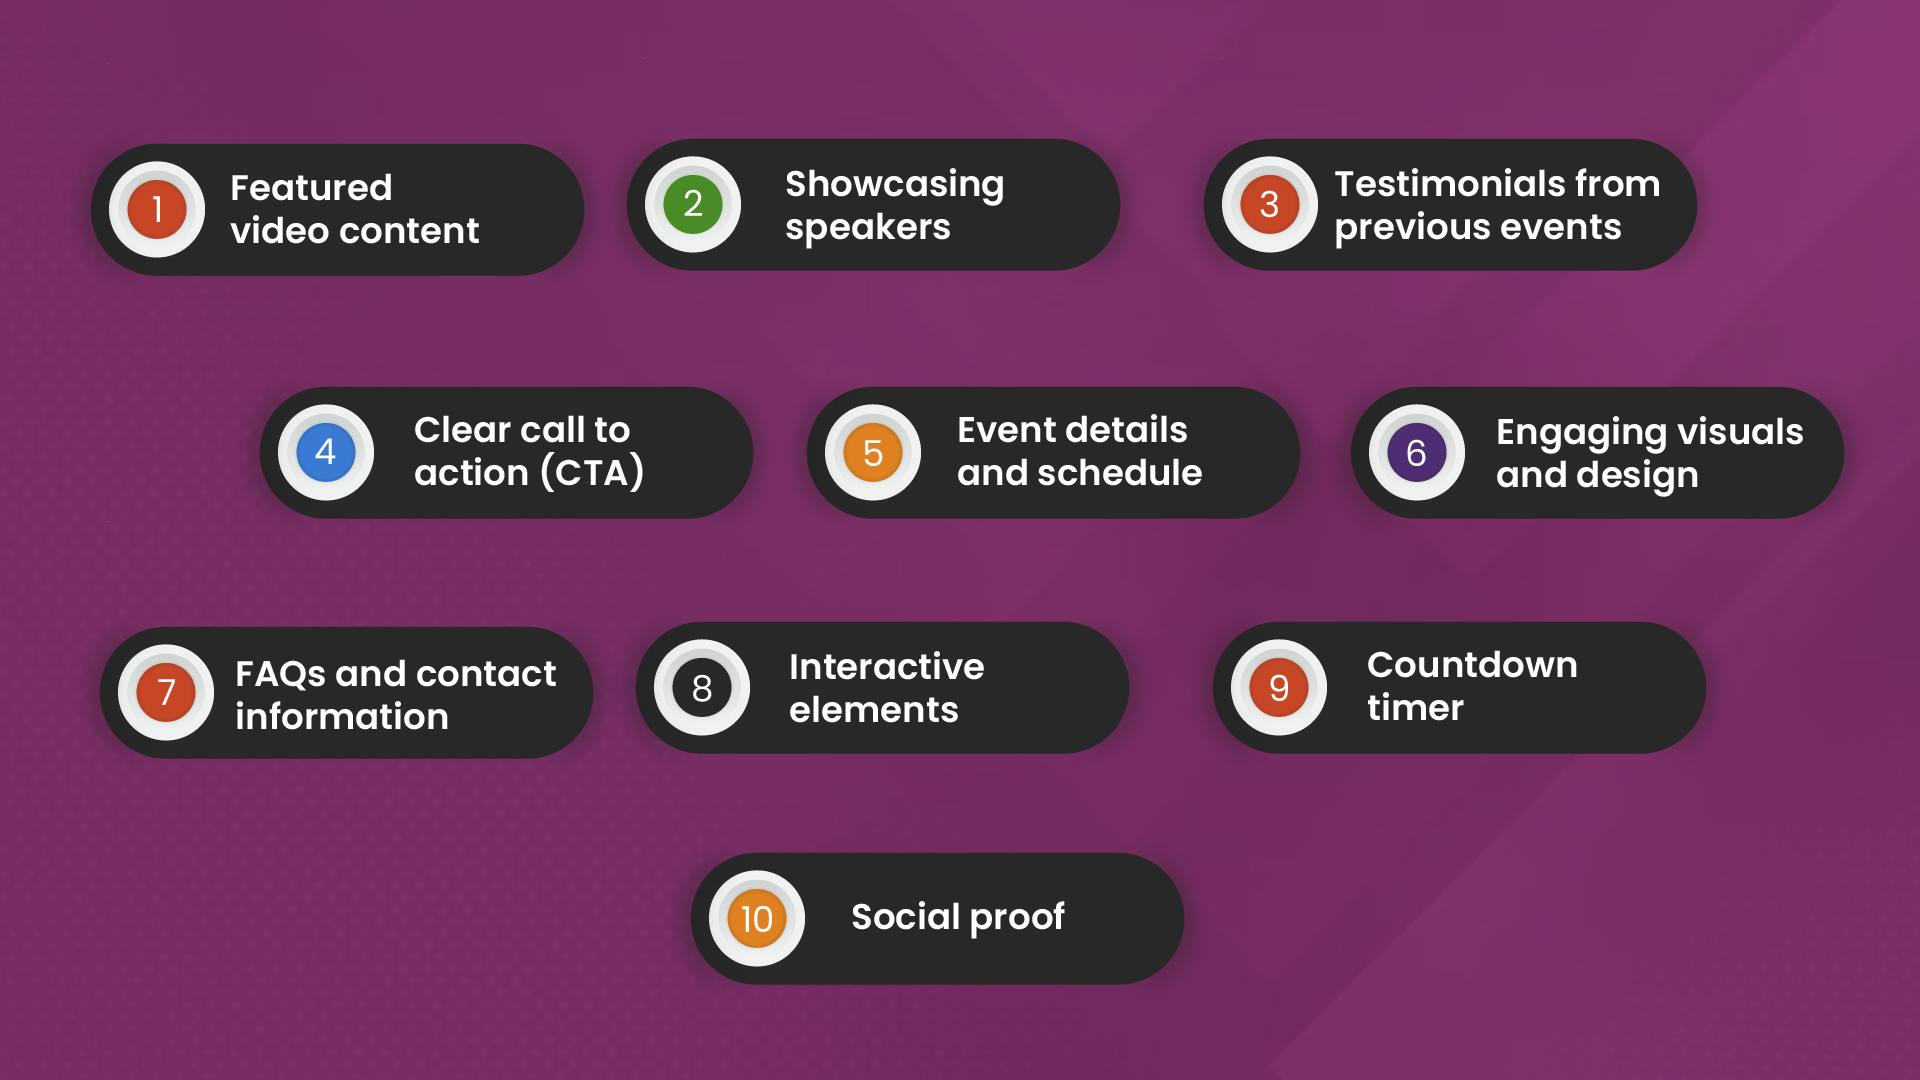 Tips for creating an event page